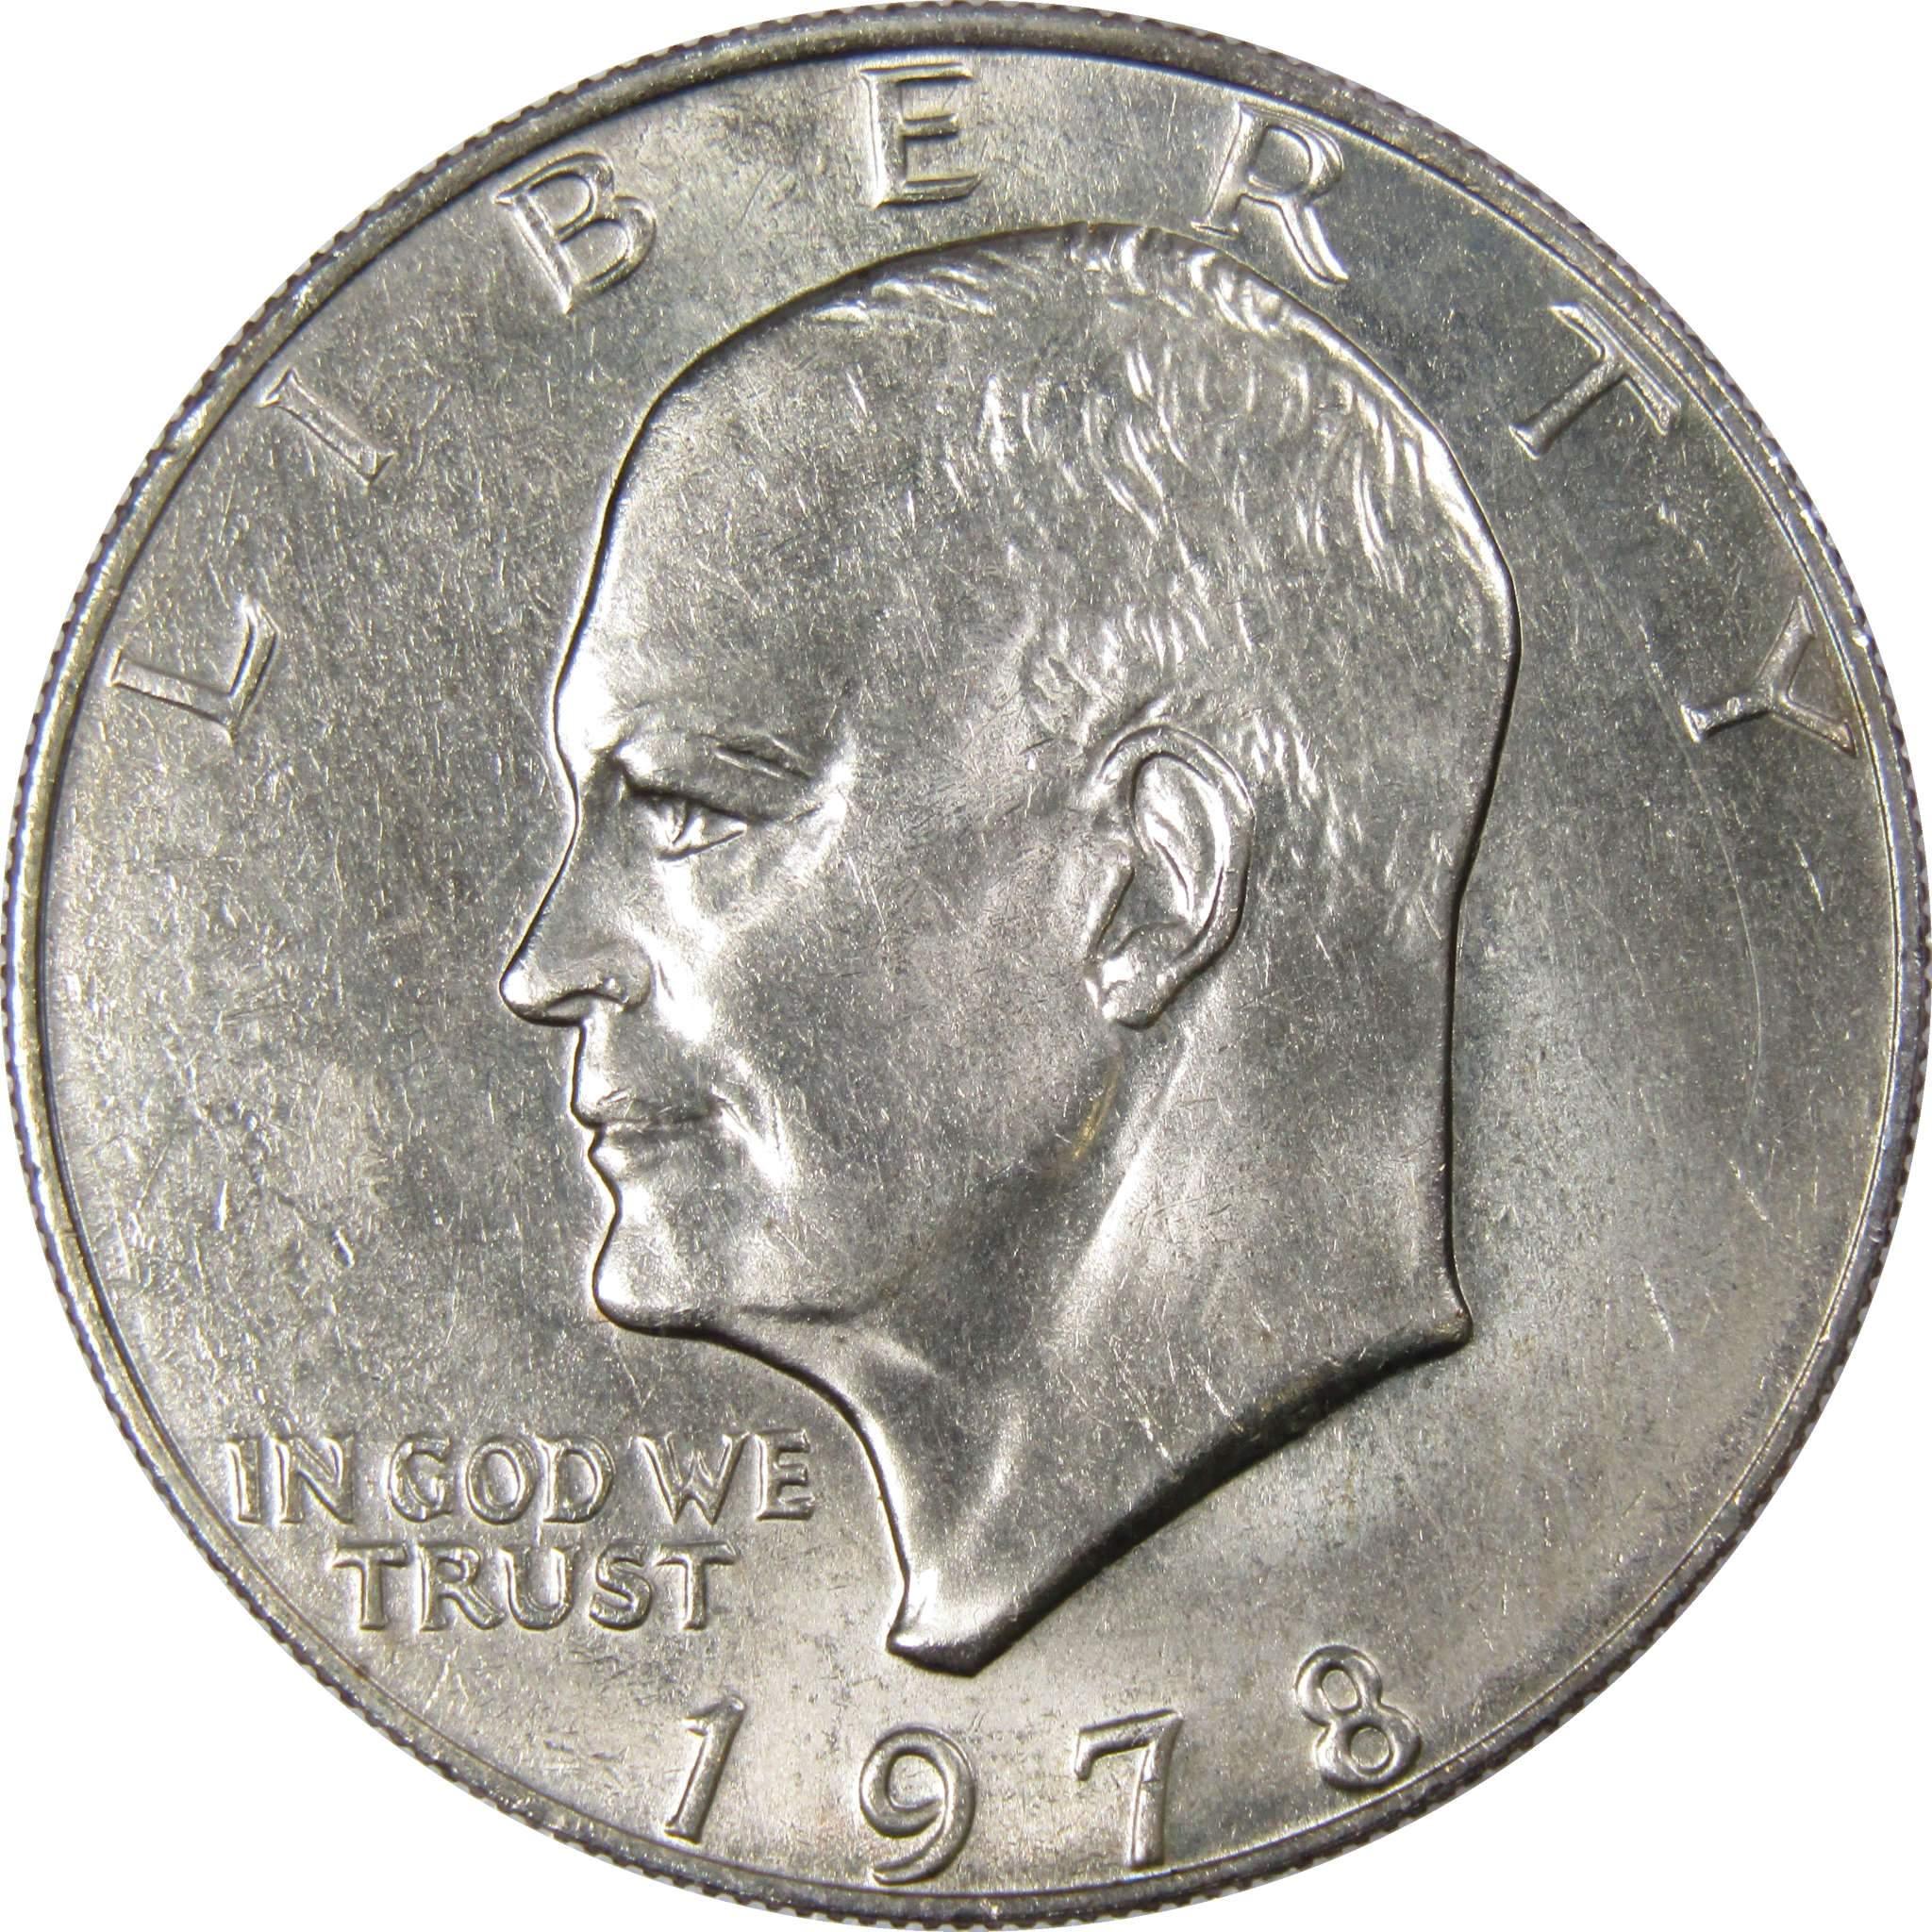 1978 Eisenhower Dollar BU Uncirculated Mint State Clad IKE $1 US Coin